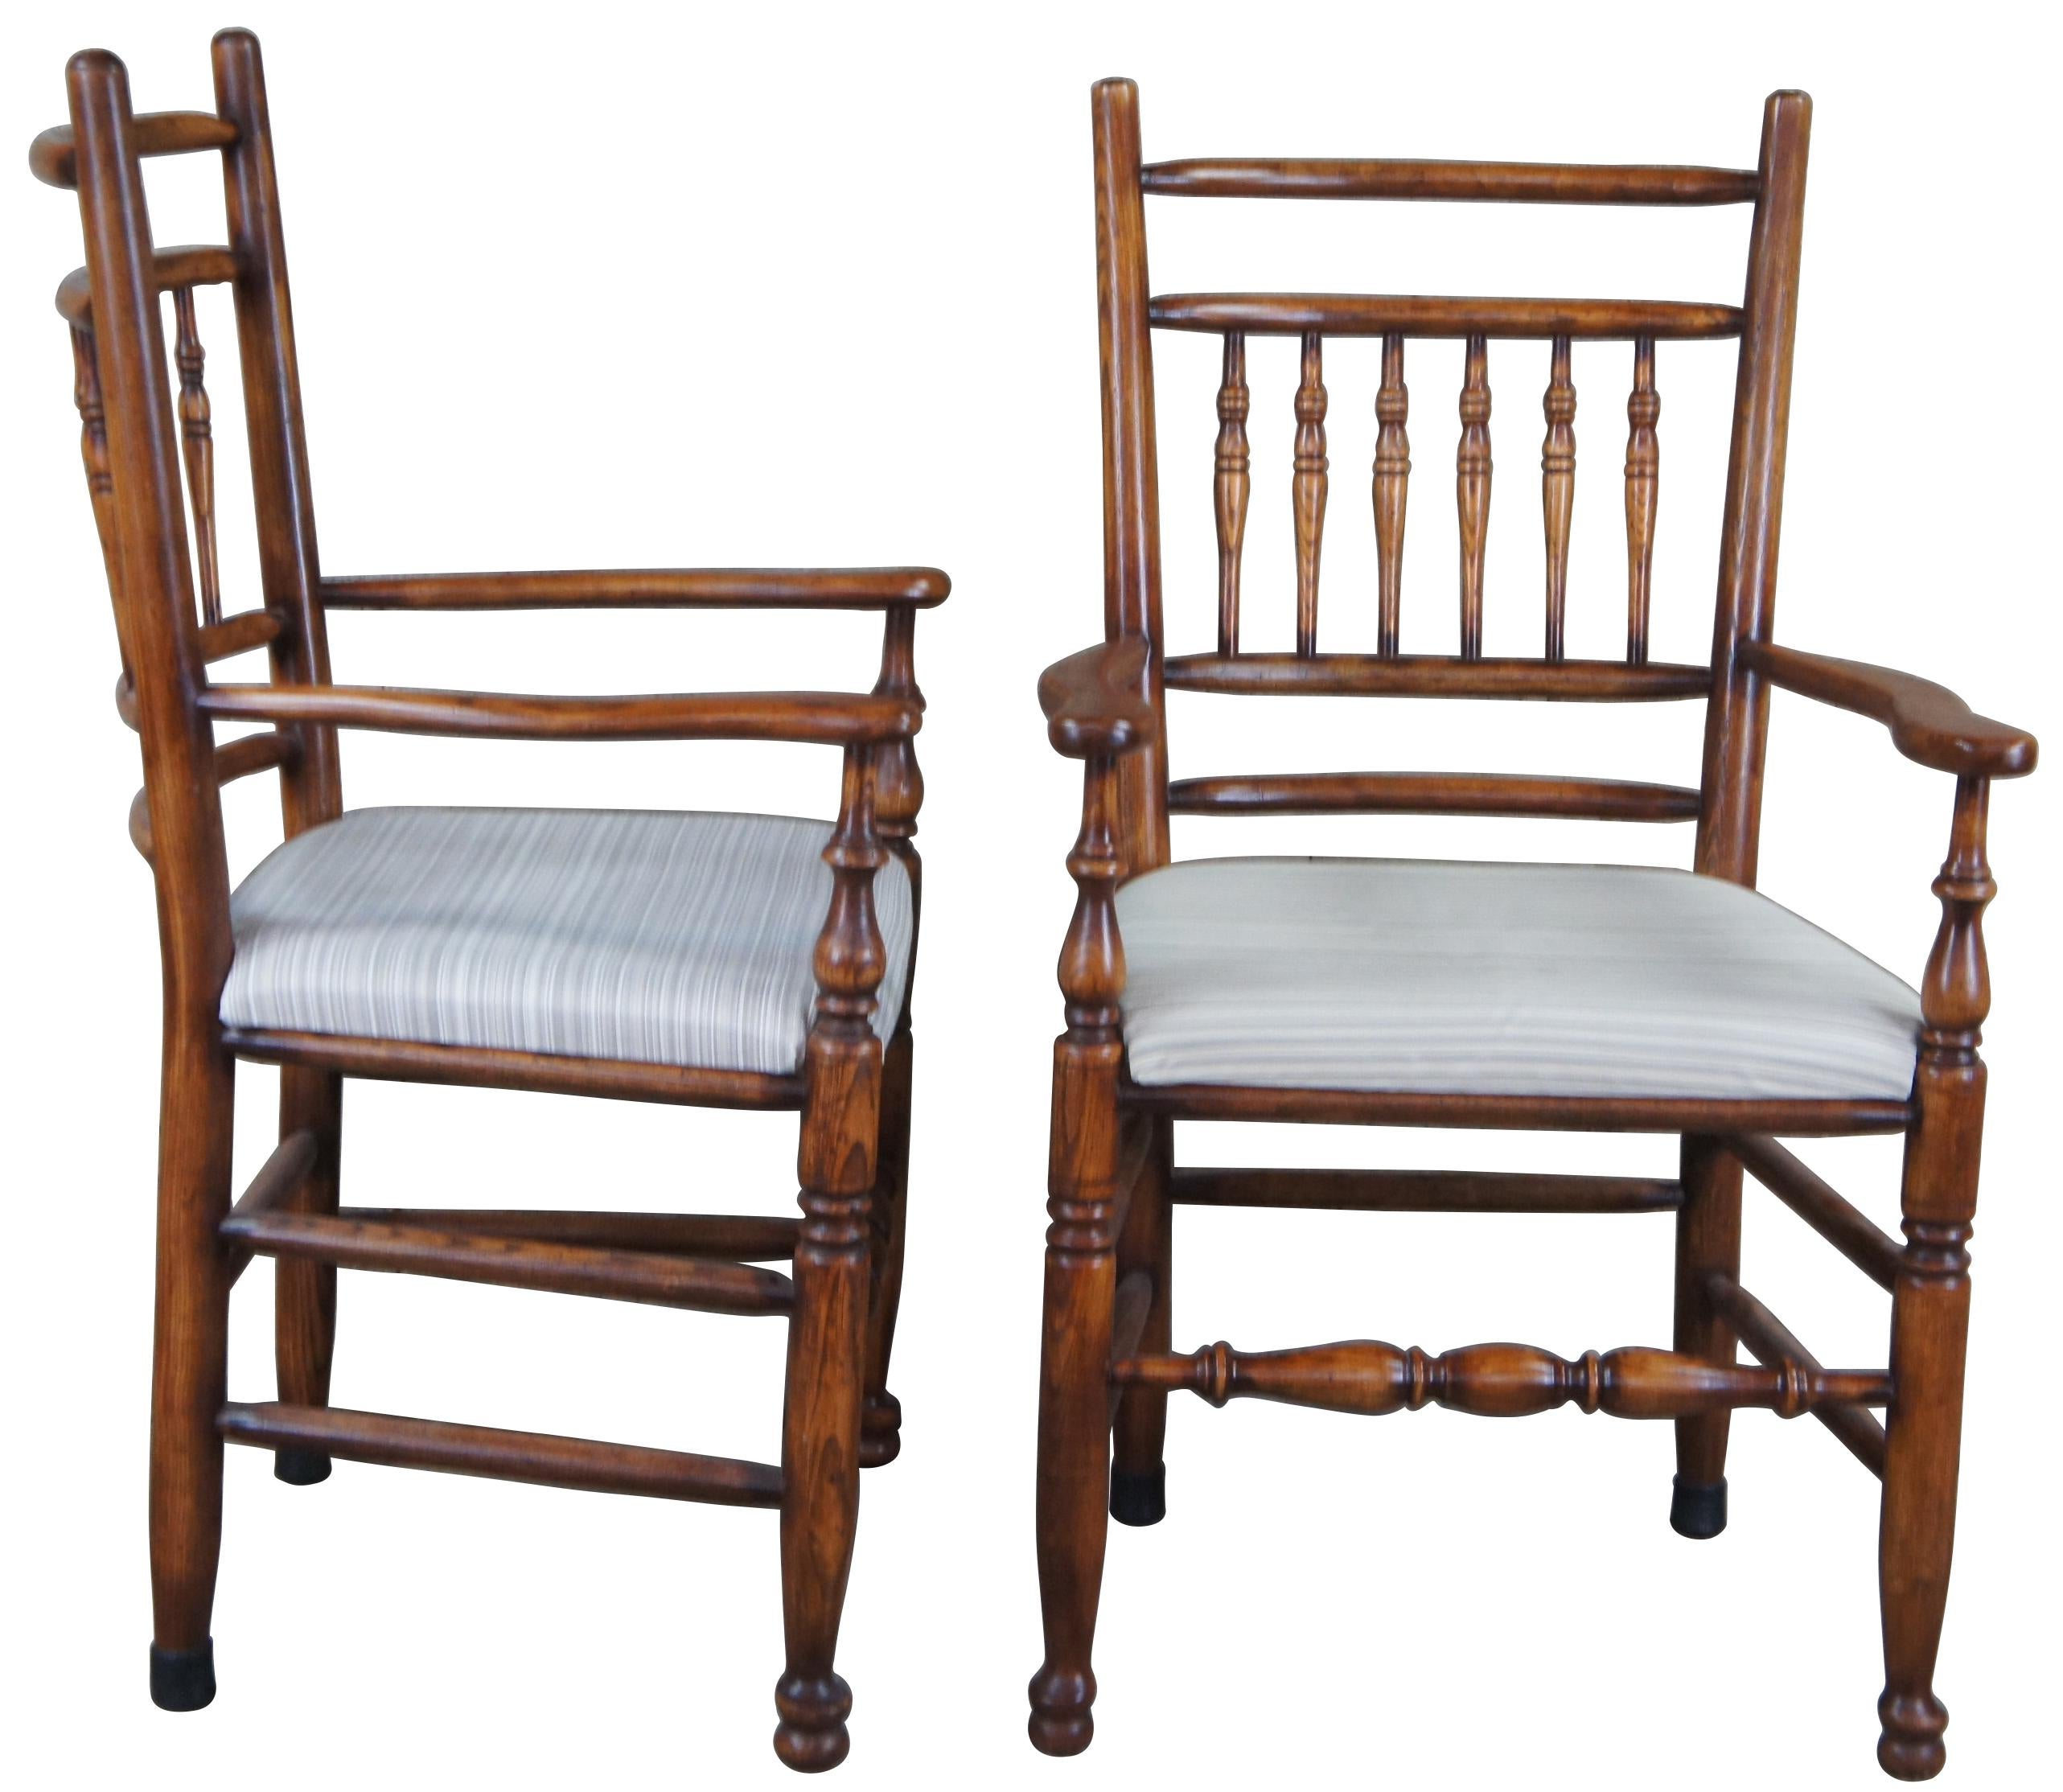 Set of four circa 1980s English Country or Lancashire style arm chairs. Made of oak featuring a spindle back and turned supports.